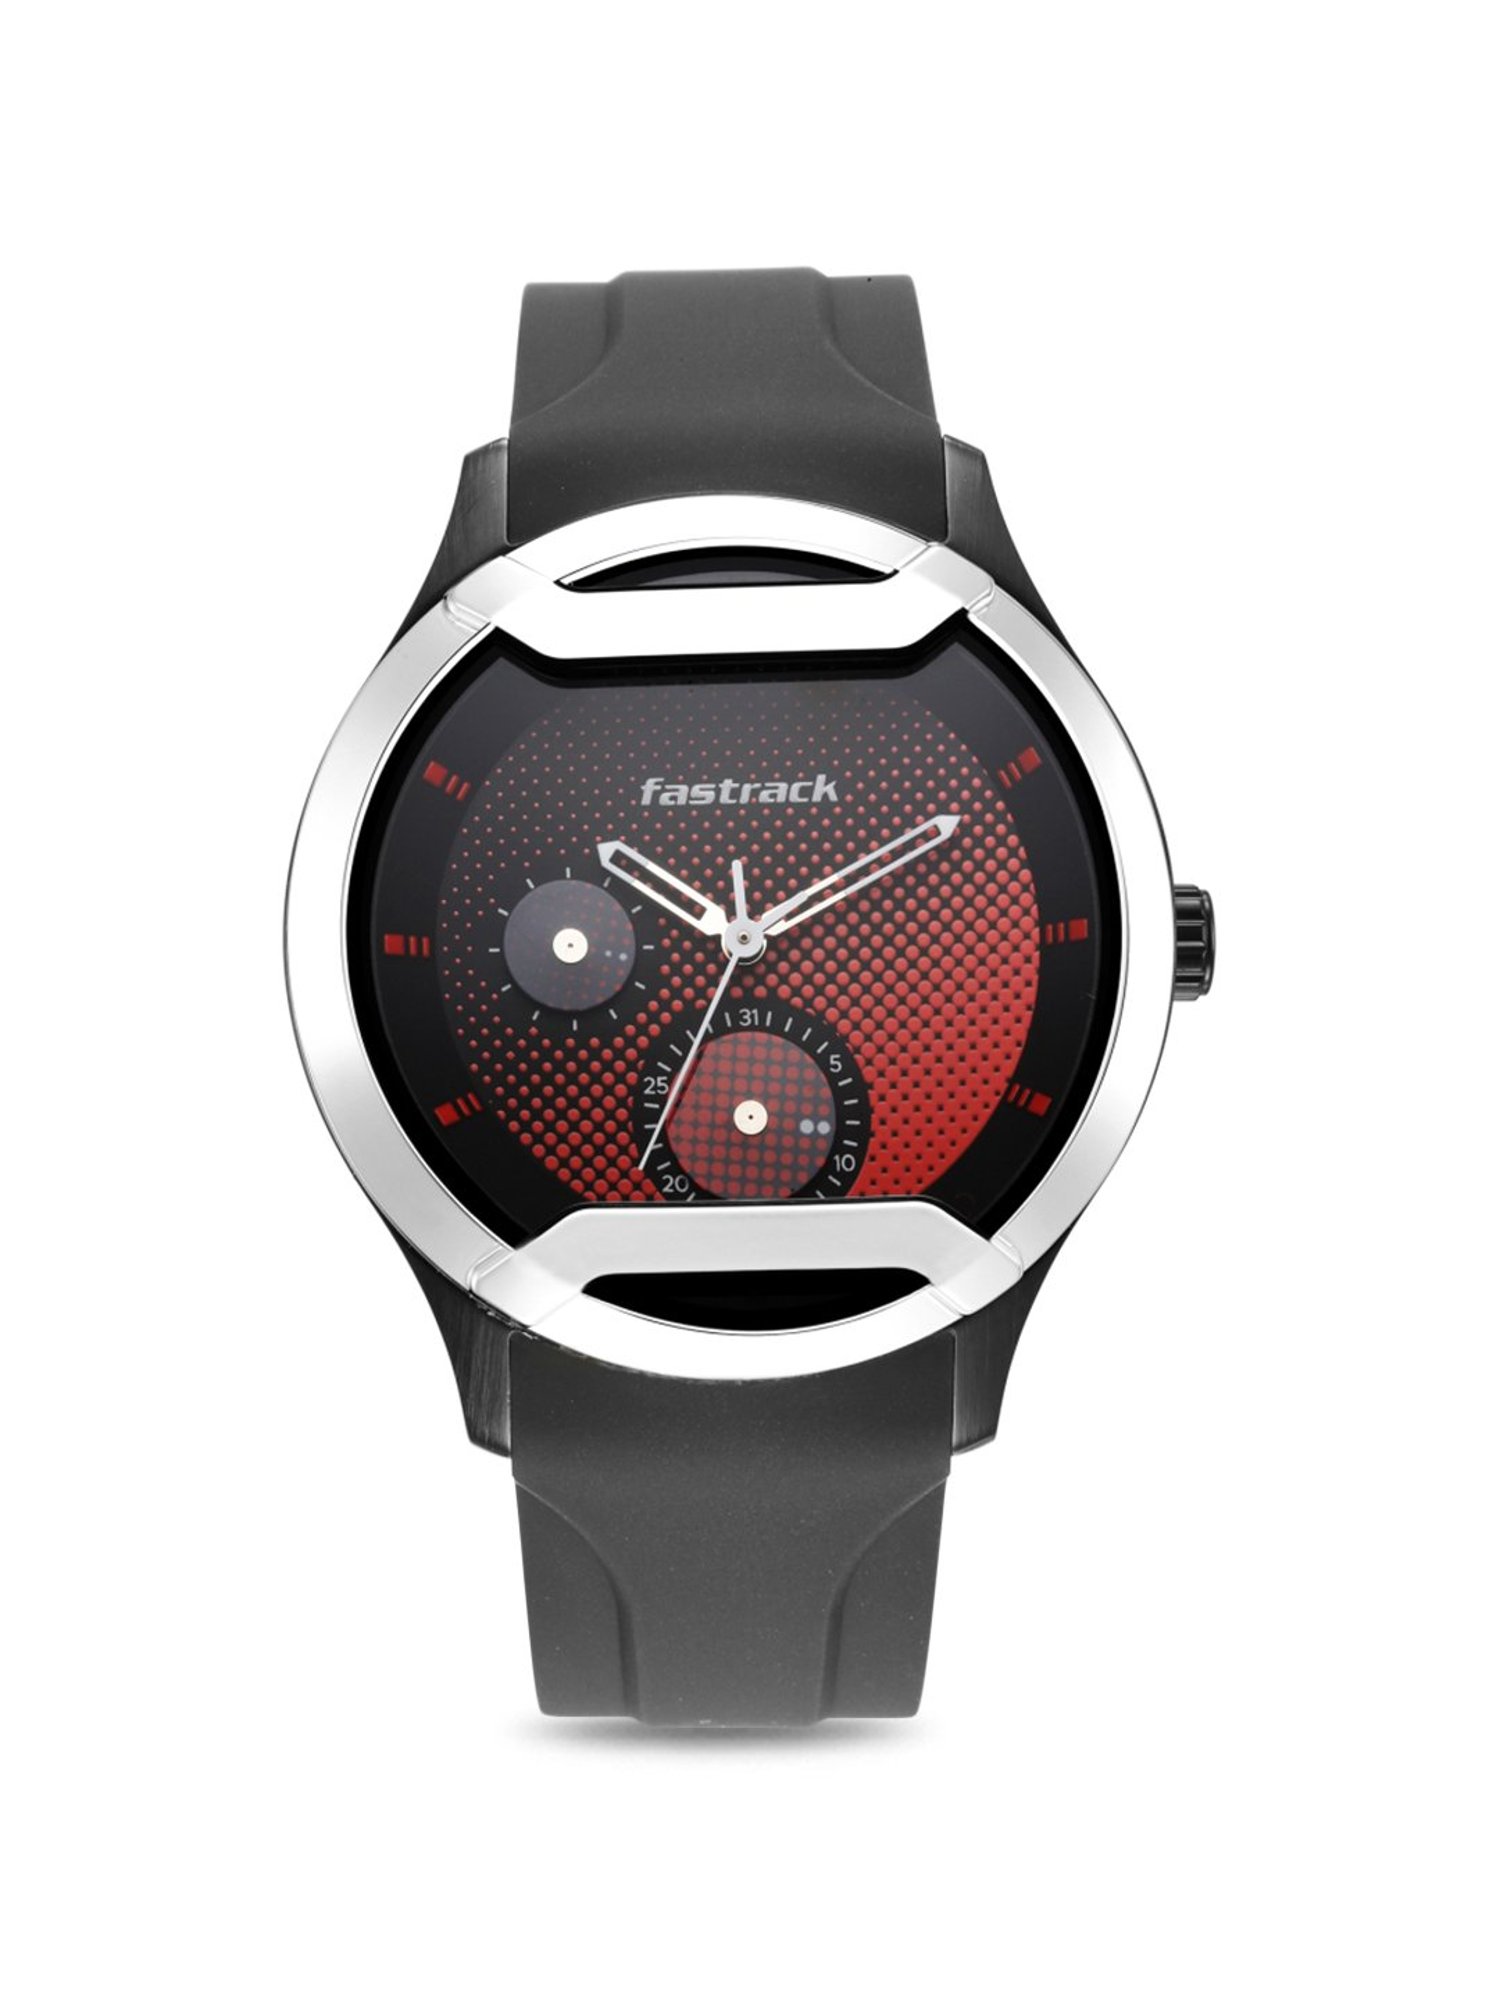 A Day In The Life Of My Runtastic Orbit Activity Tracker - Fitness Test  Drive